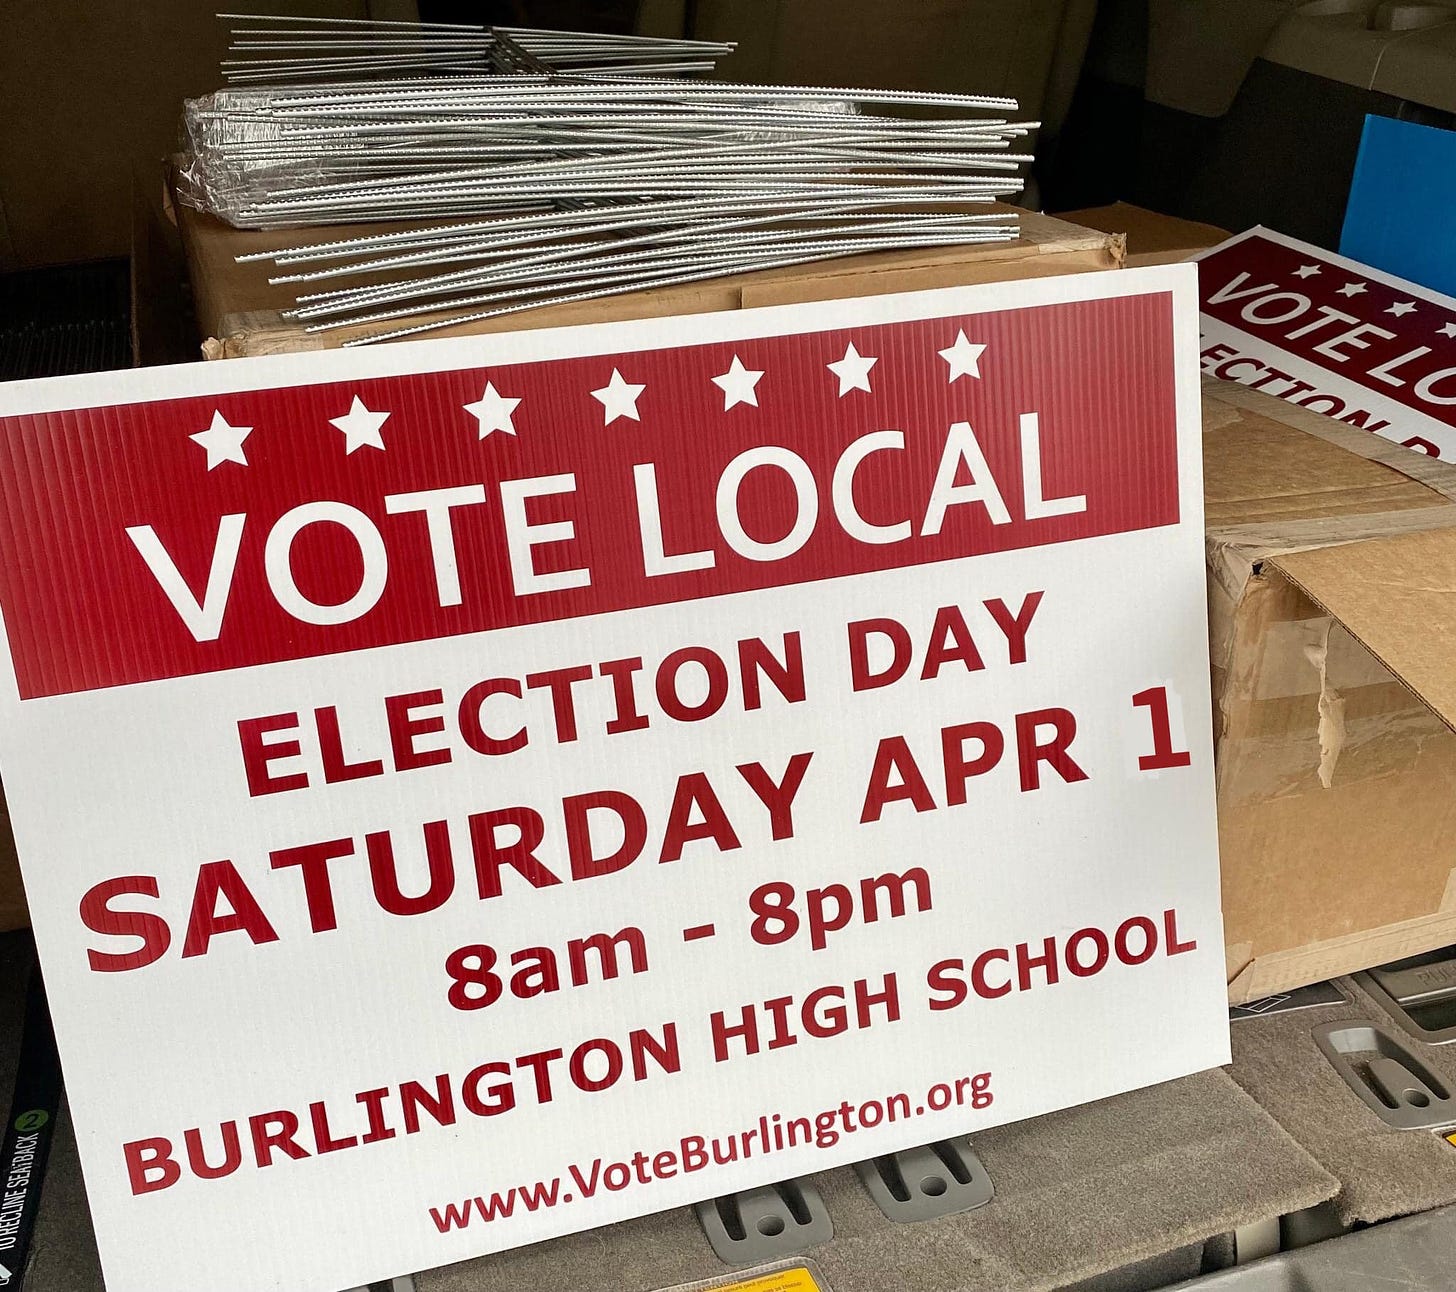 May be an image of text that says 'VOTELO VOTE LOCAL ELECTION APR 1 DAY 8am- SATURDAY -8pm SCHOOL BURLINGTON www.VoteBurlington.org HIGH'